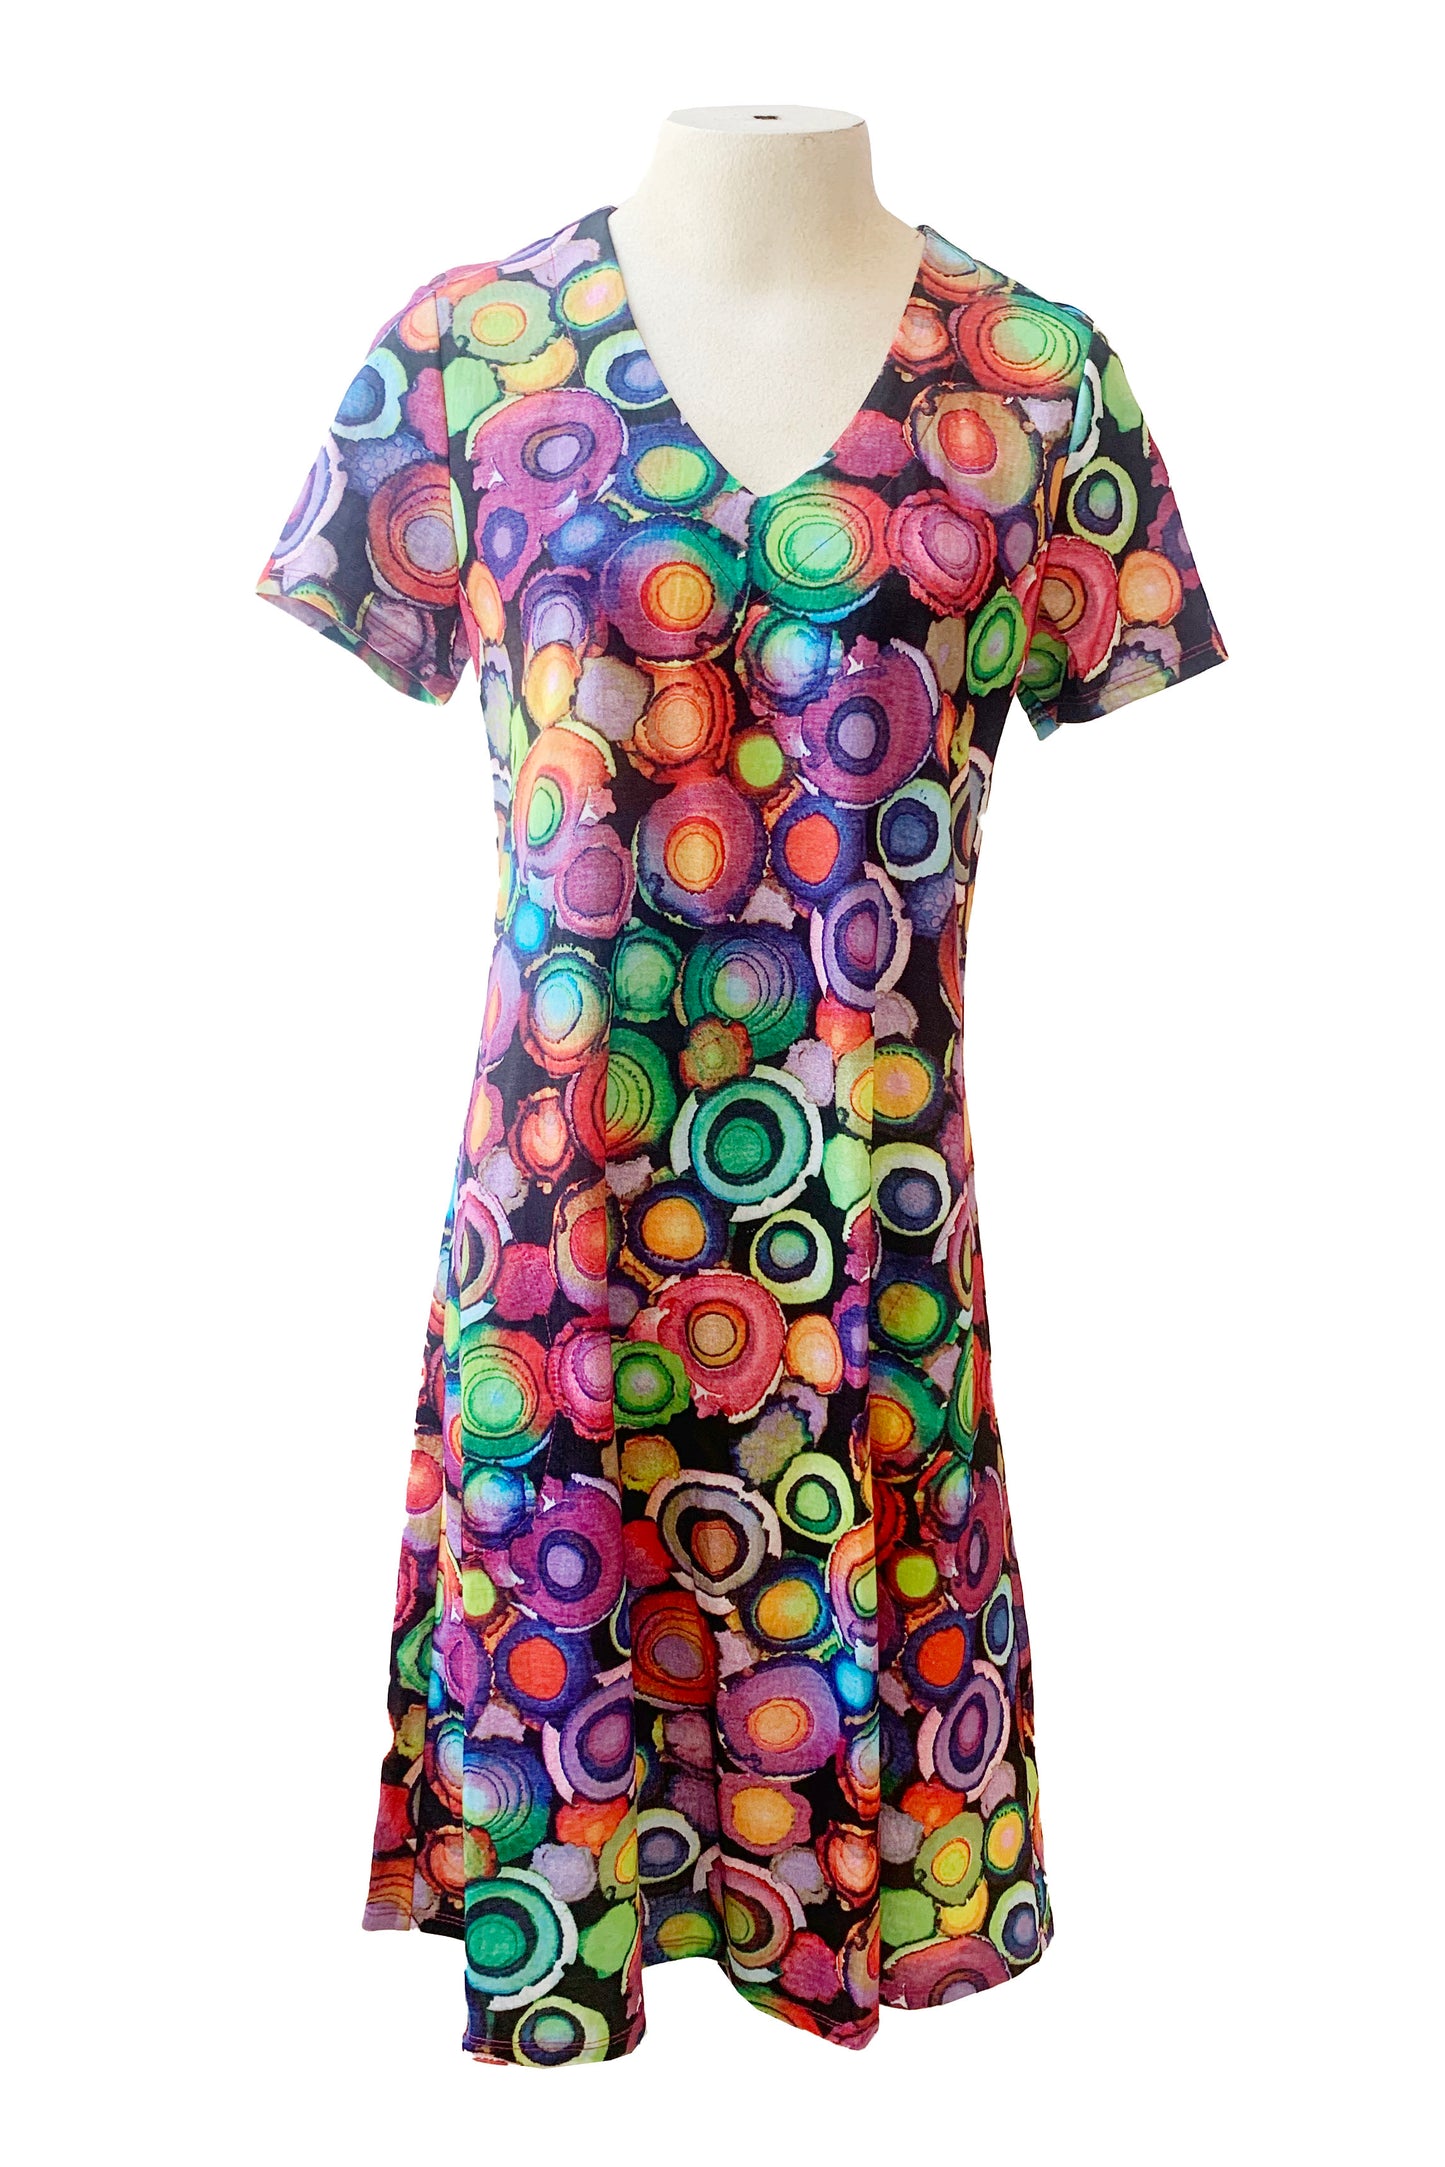 The Chase Dress by Pure Essence in a Multicolour circles print is shown on a mannequin in front of a white background 